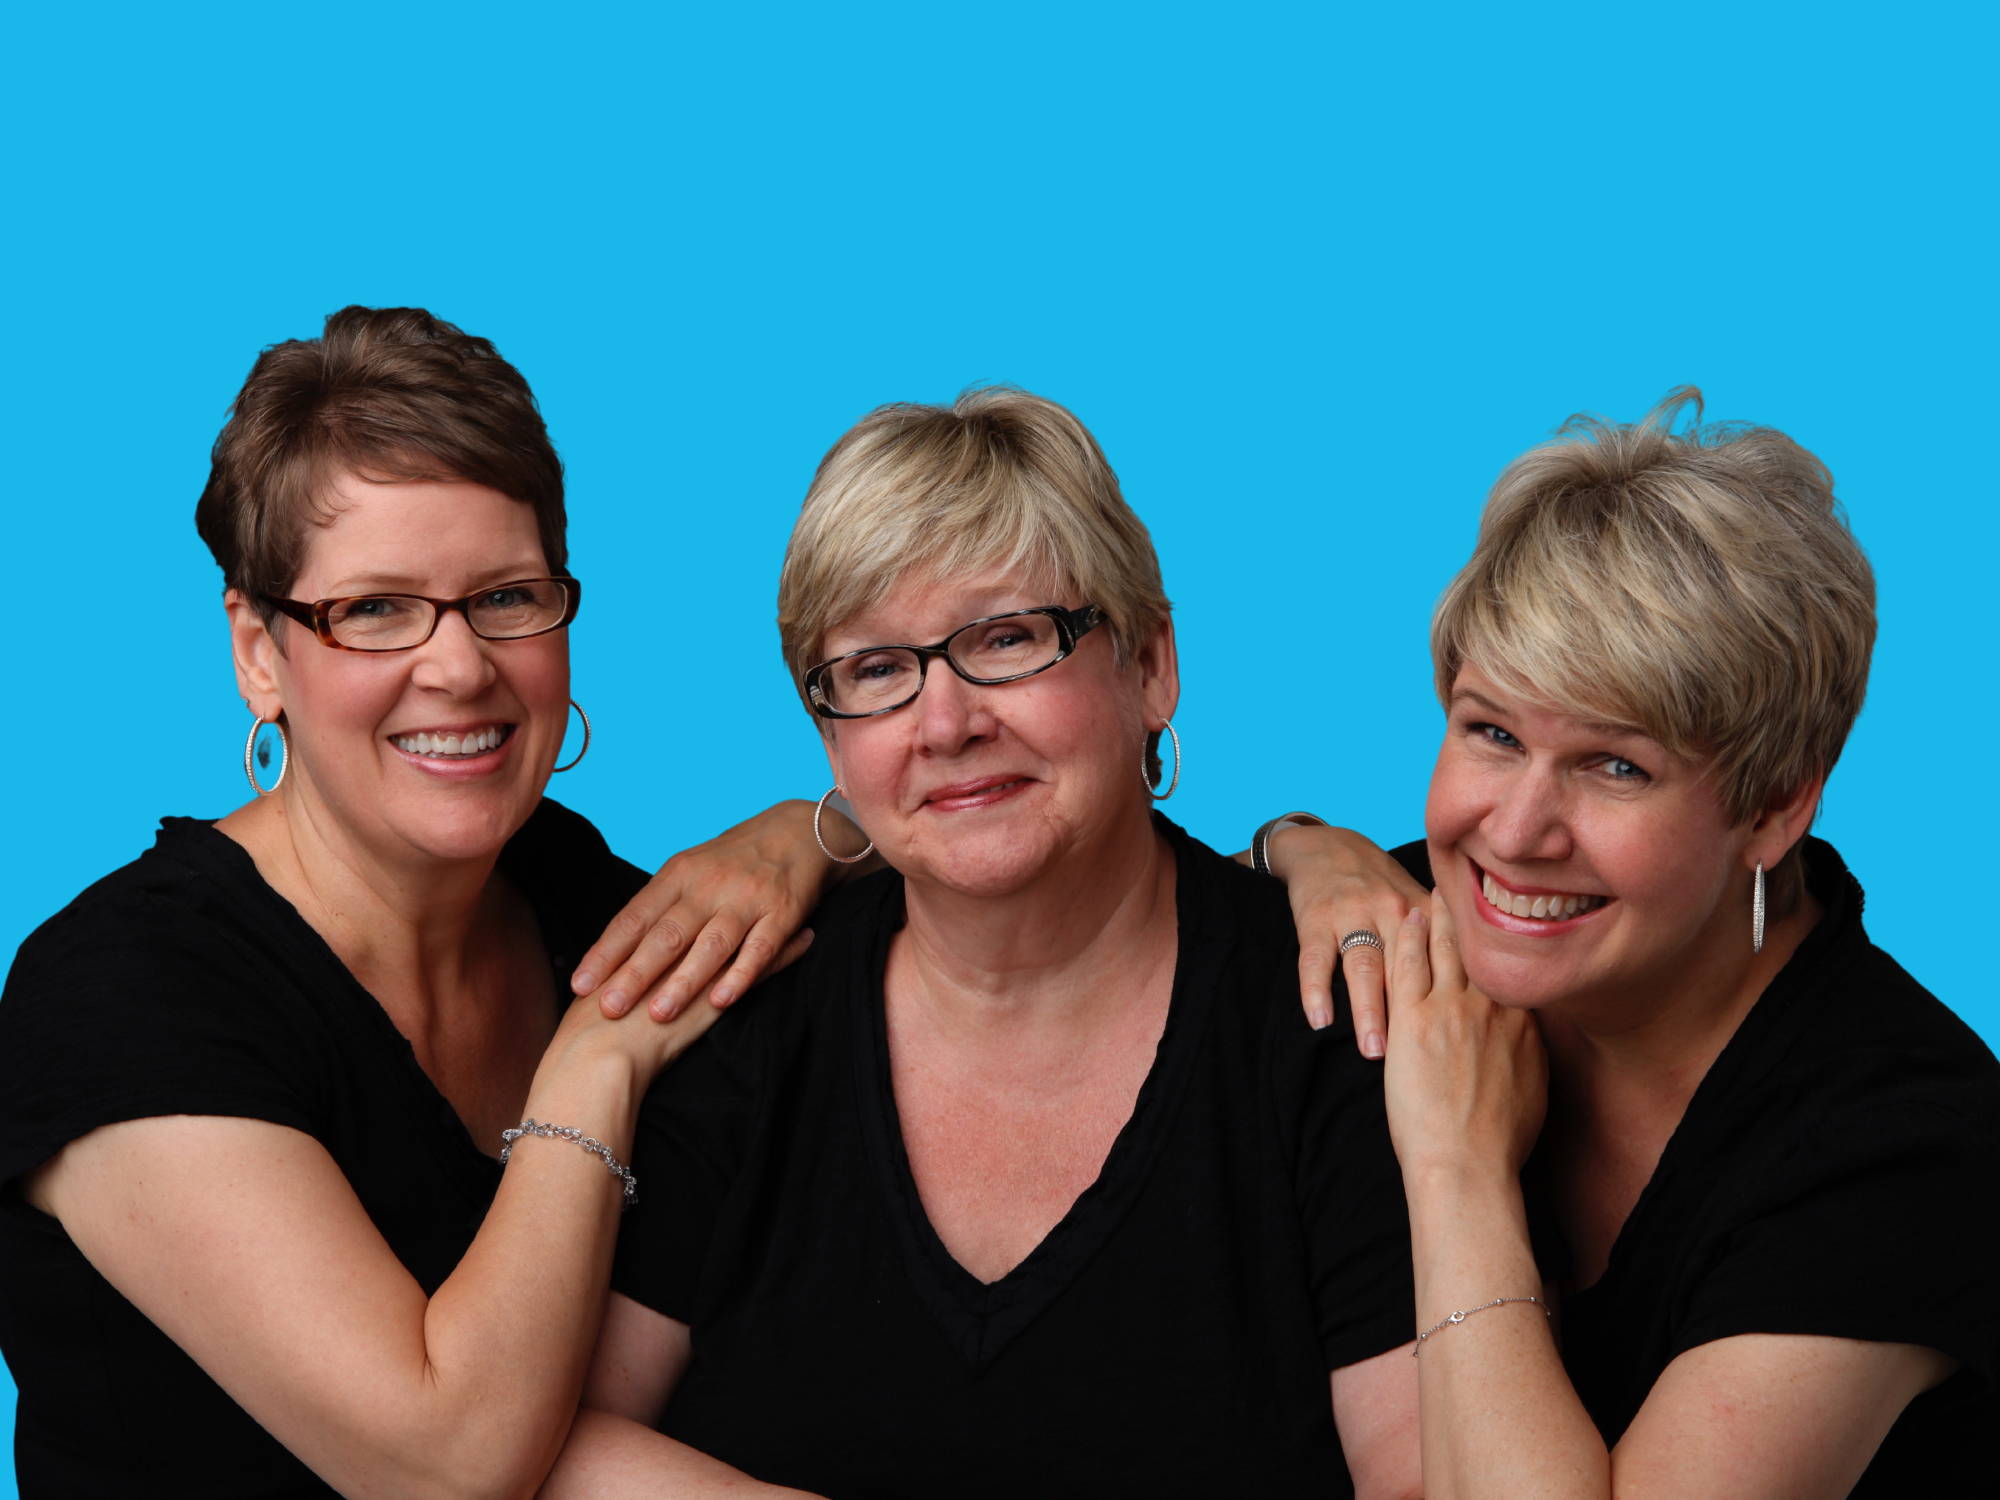 3 blonde sisters smiling in black t-shirts. the two younger sisters are leaning on the shoulders of the older sister who is seated in the middle. Image set against a blue backdrop.